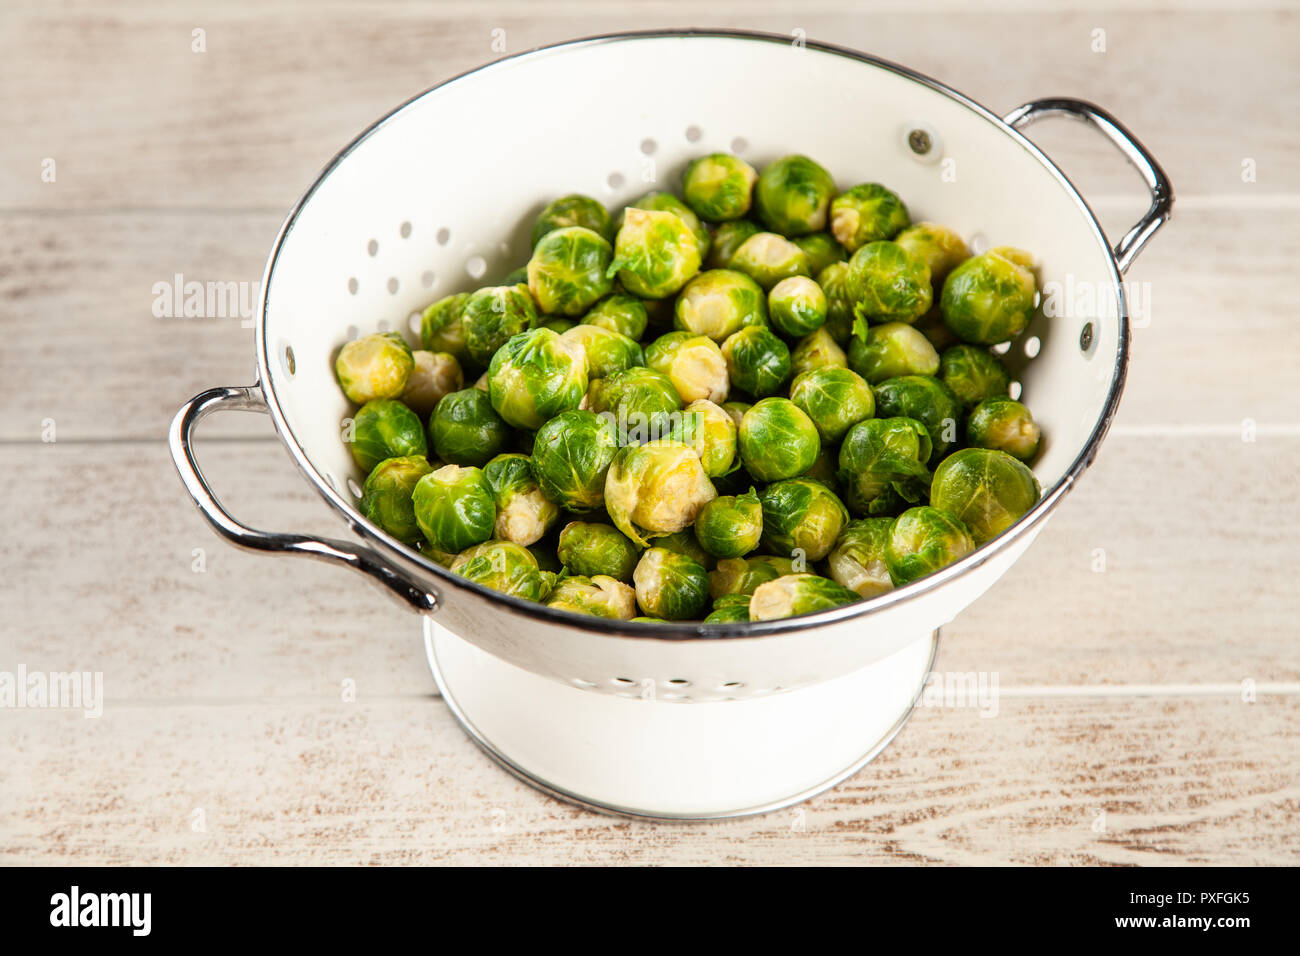 Brussles sprouts in a colander Stock Photo